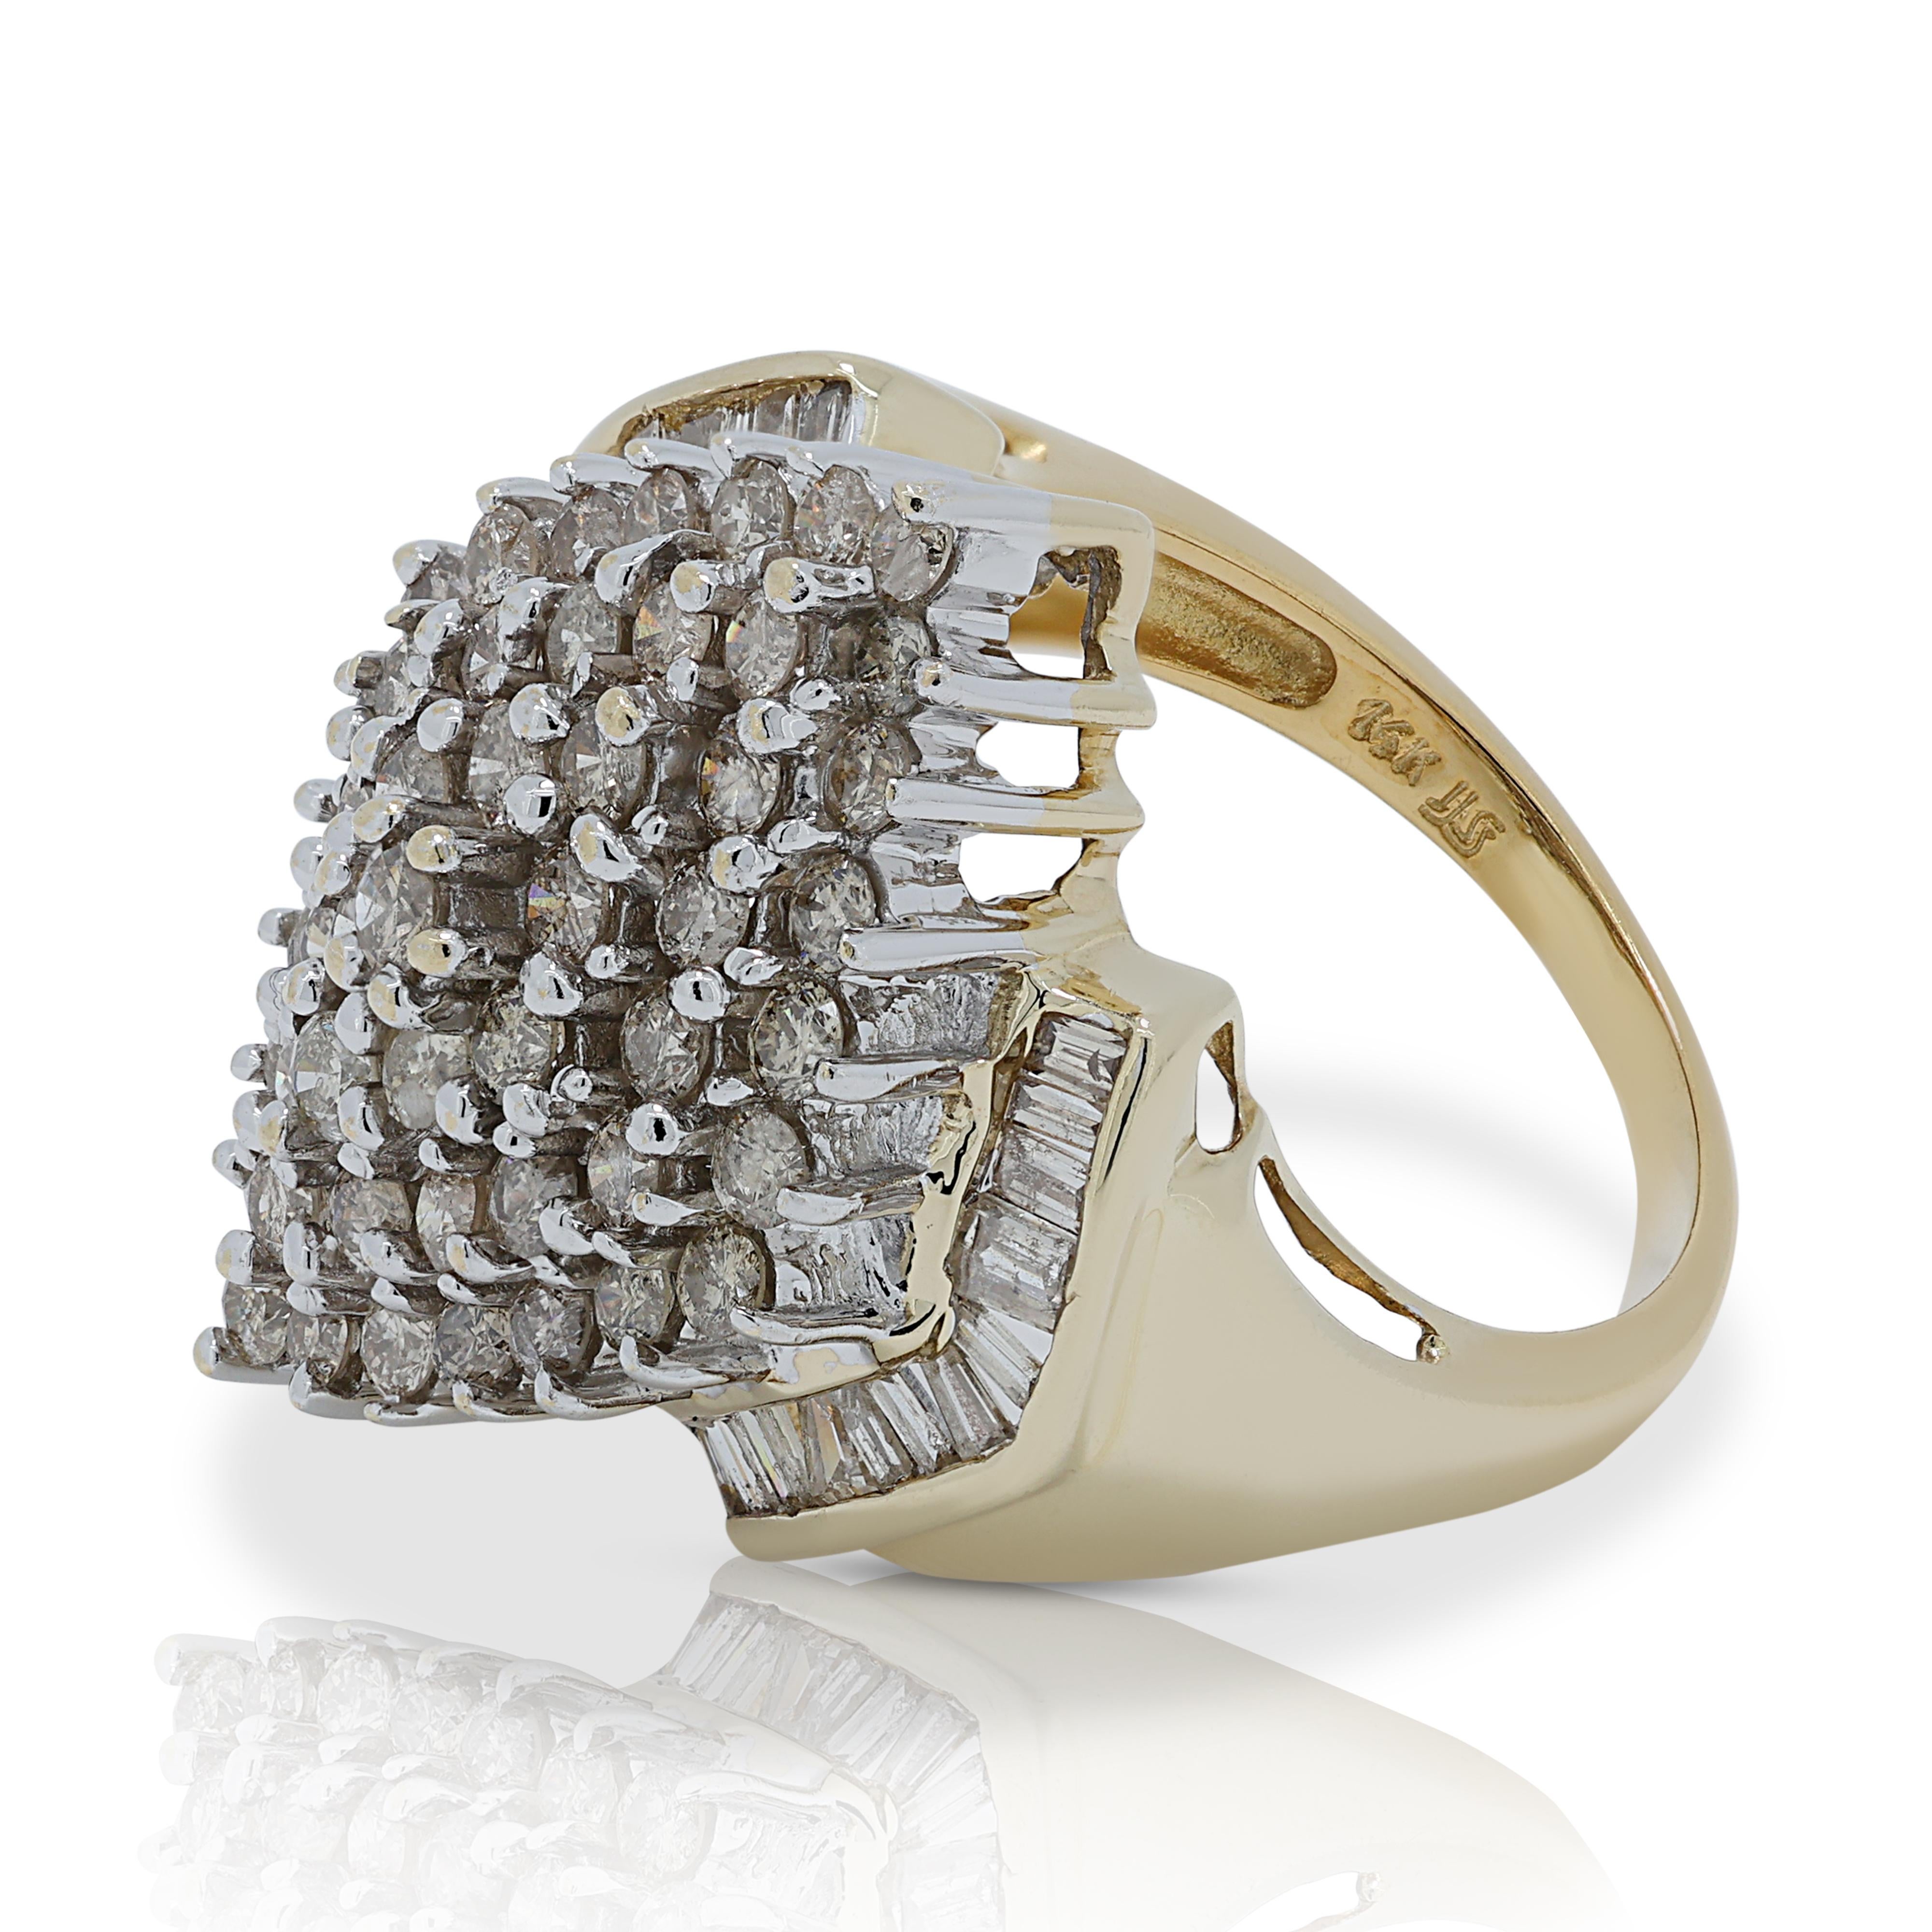 Round Cut Gorgeous 1.75ct Diamonds Cluster Ring in 14K Yellow Gold